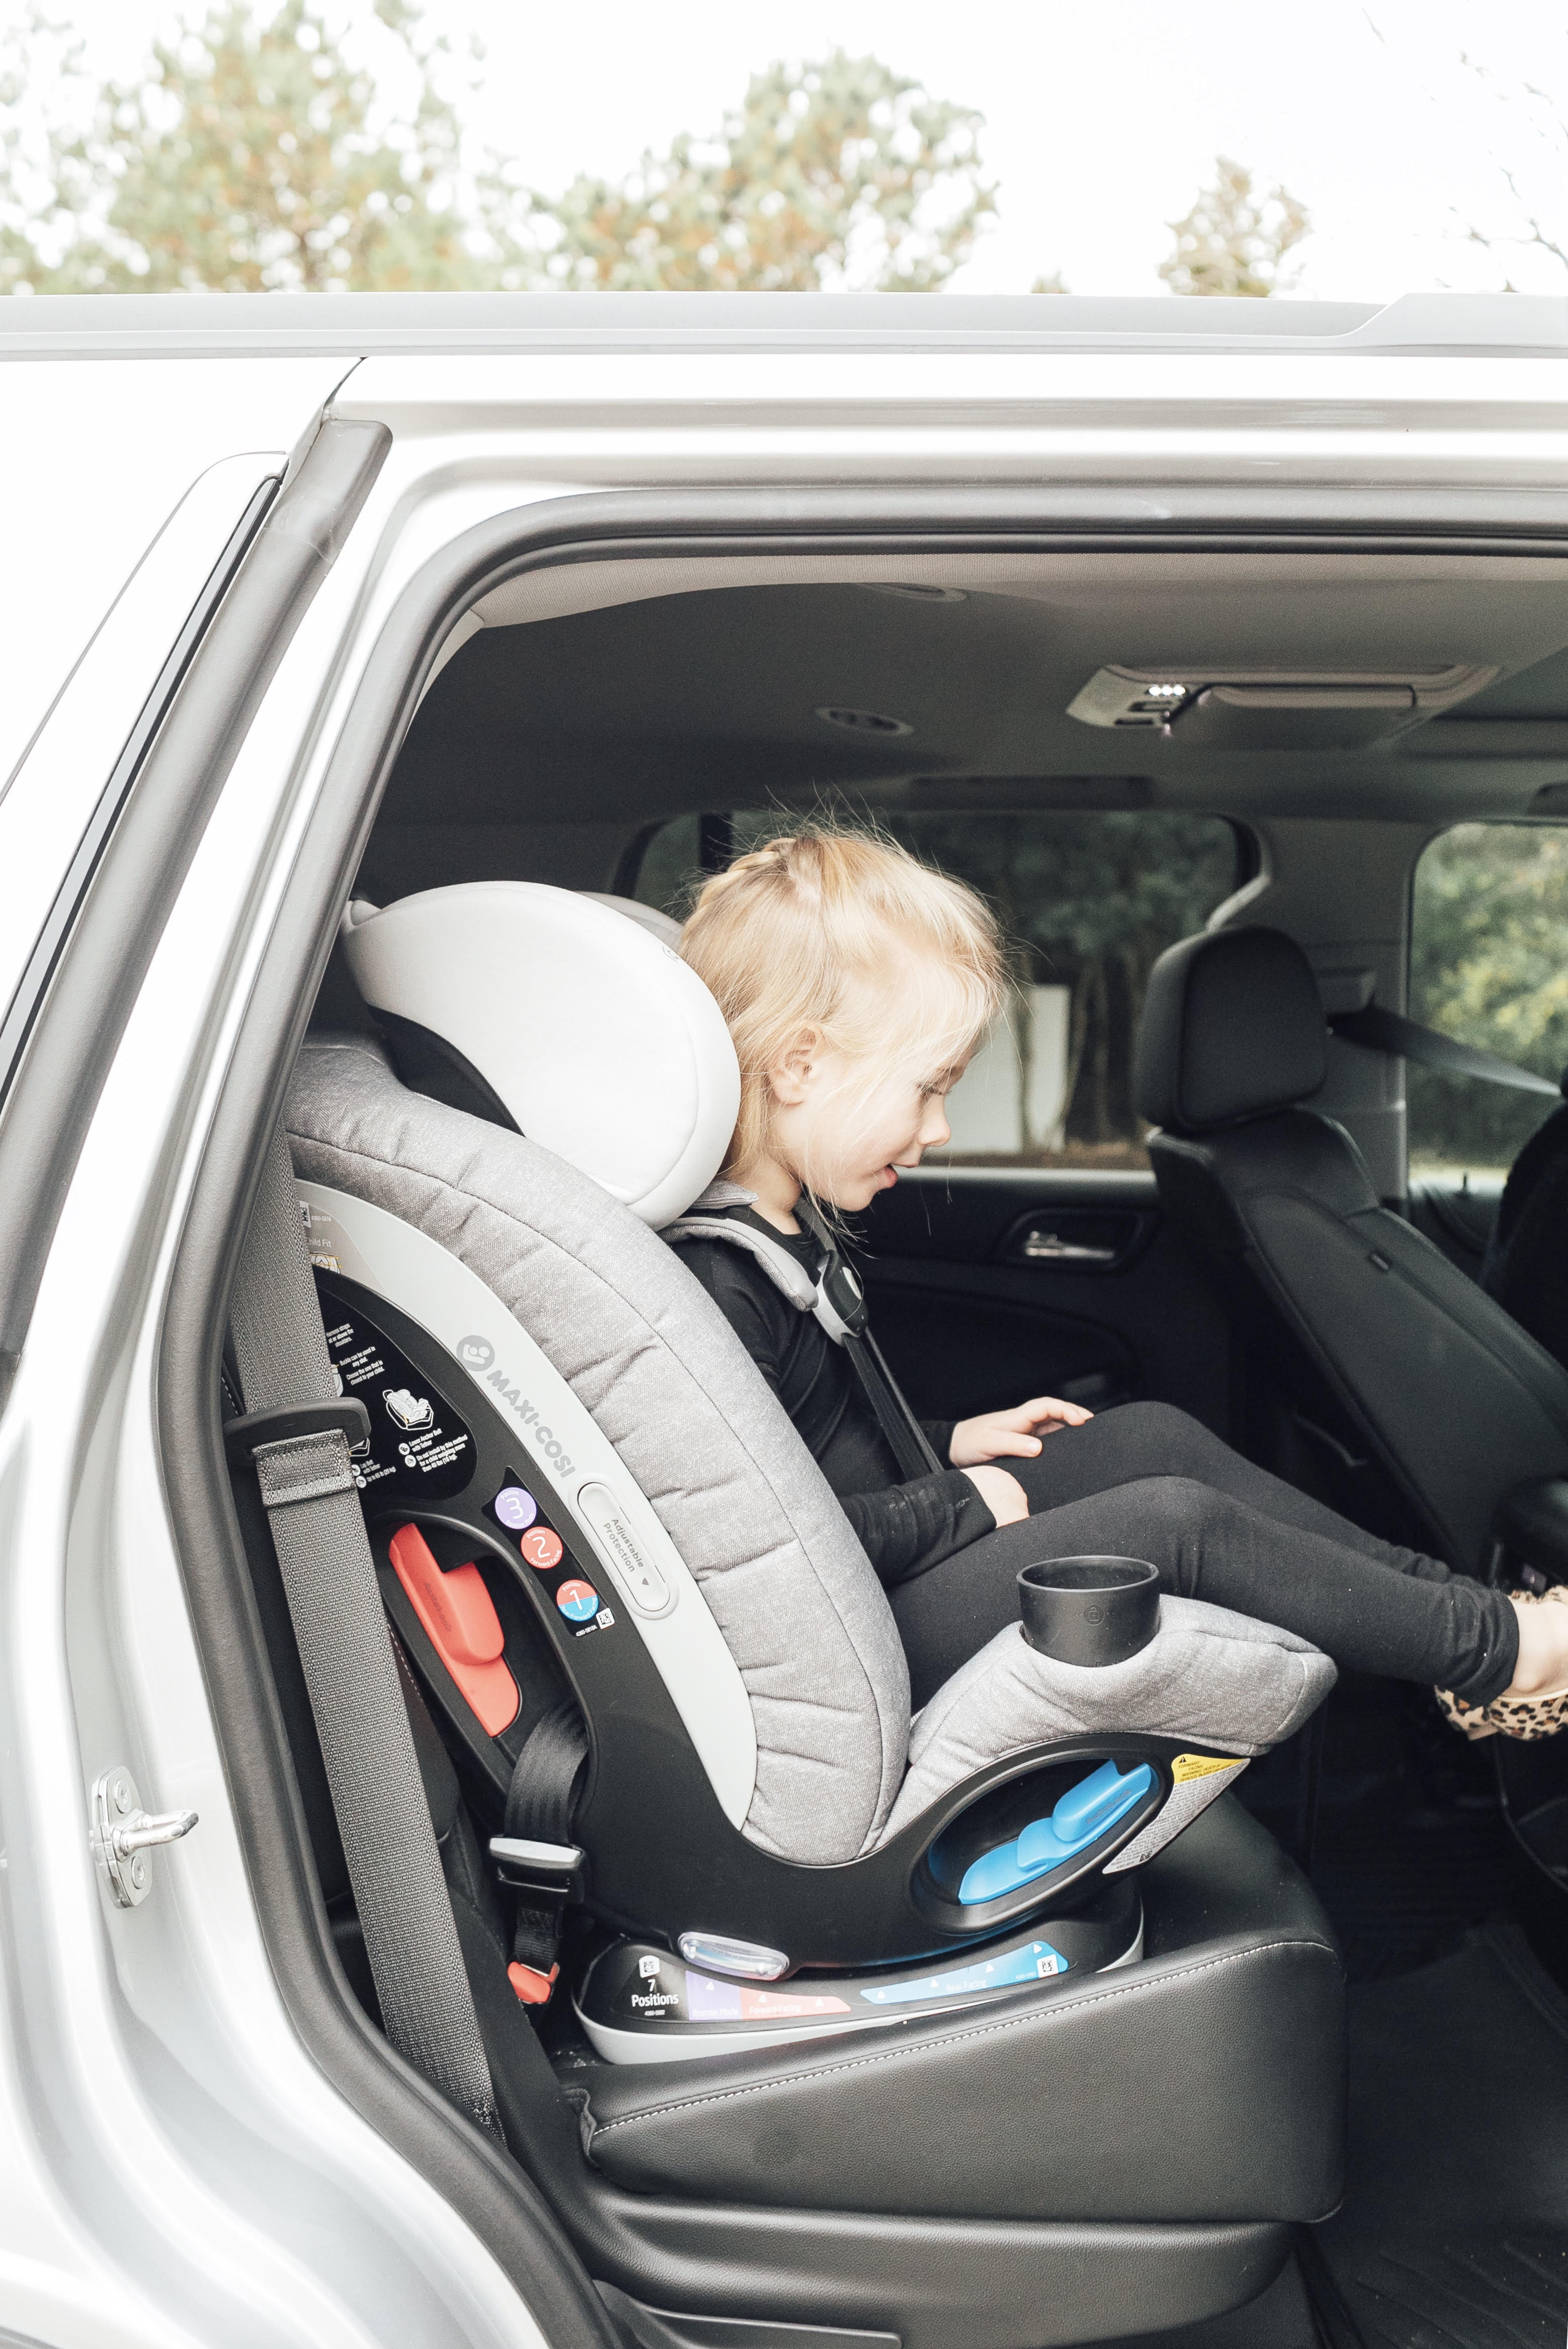 Top US lifestyle blog, Walking in Memphis in High Heels, features some Fun Ideas for Long Road Trips to entertain your children: image of a toddler in her Maxi Cosi car seat